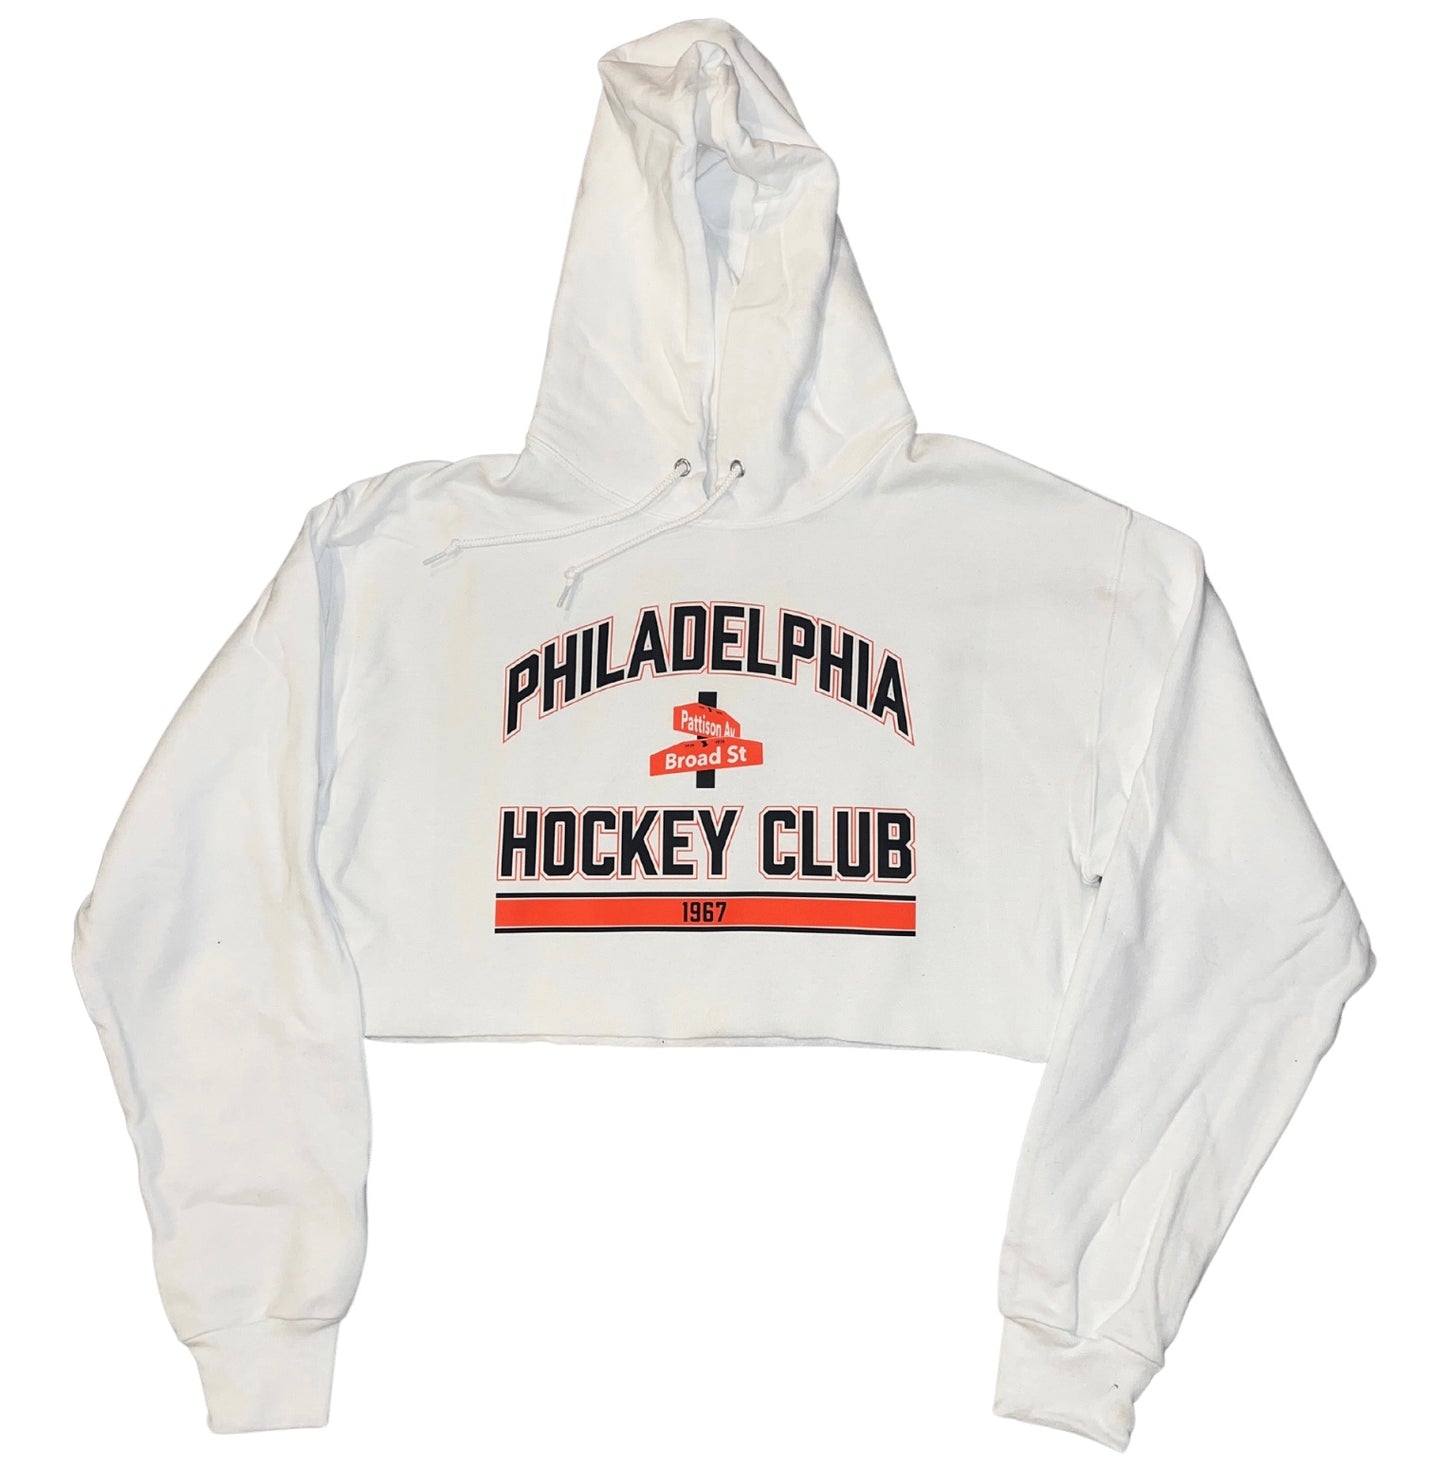 Philly Arched Flyers sweatshirt